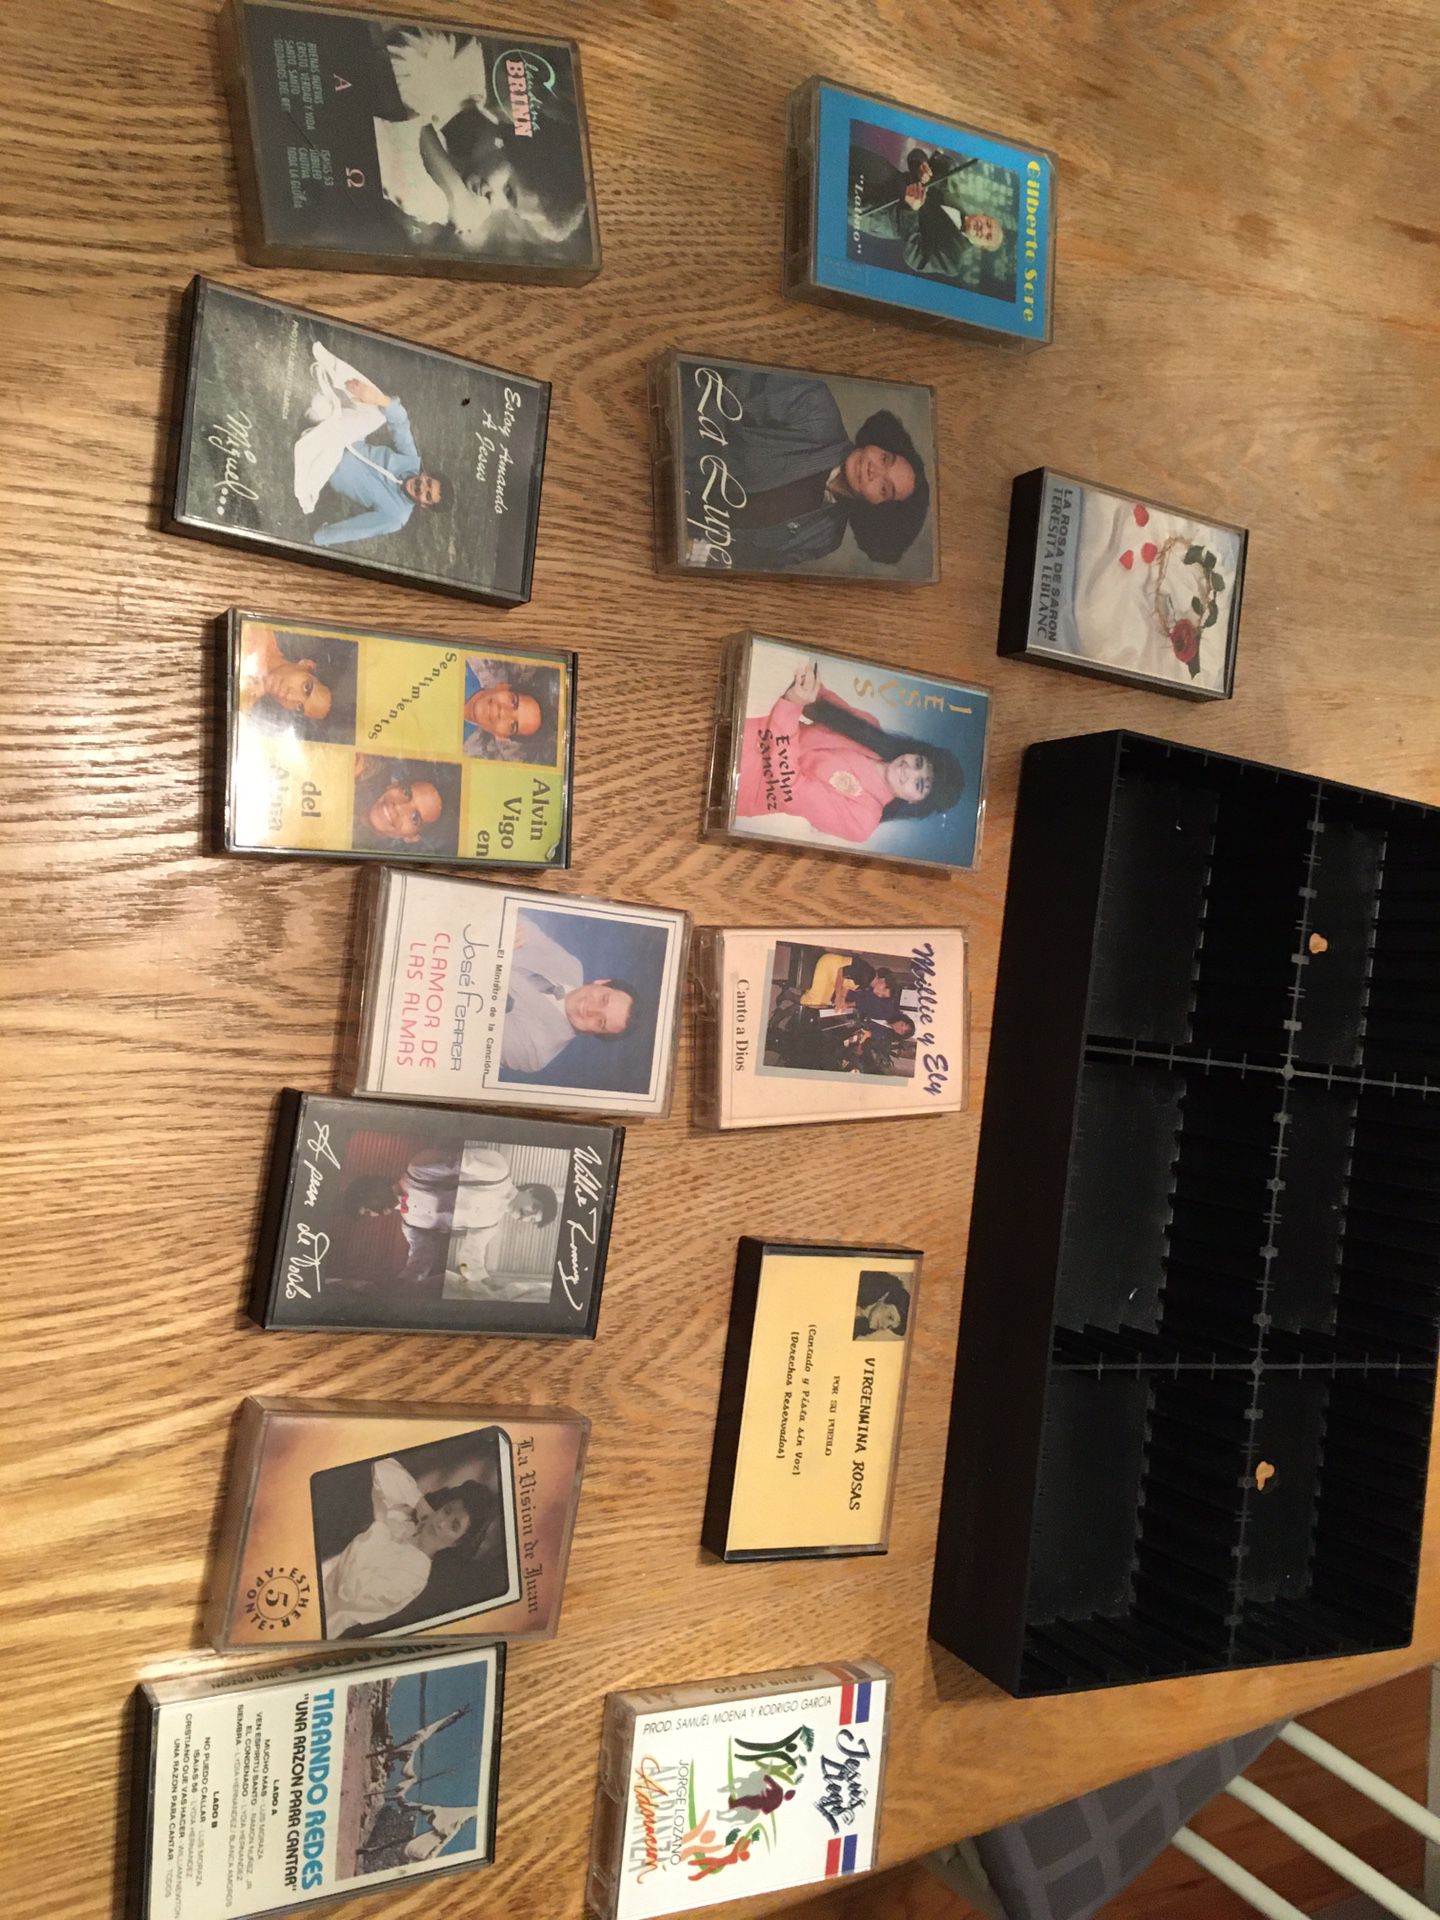 Collection of Spanish music tapes and organizer